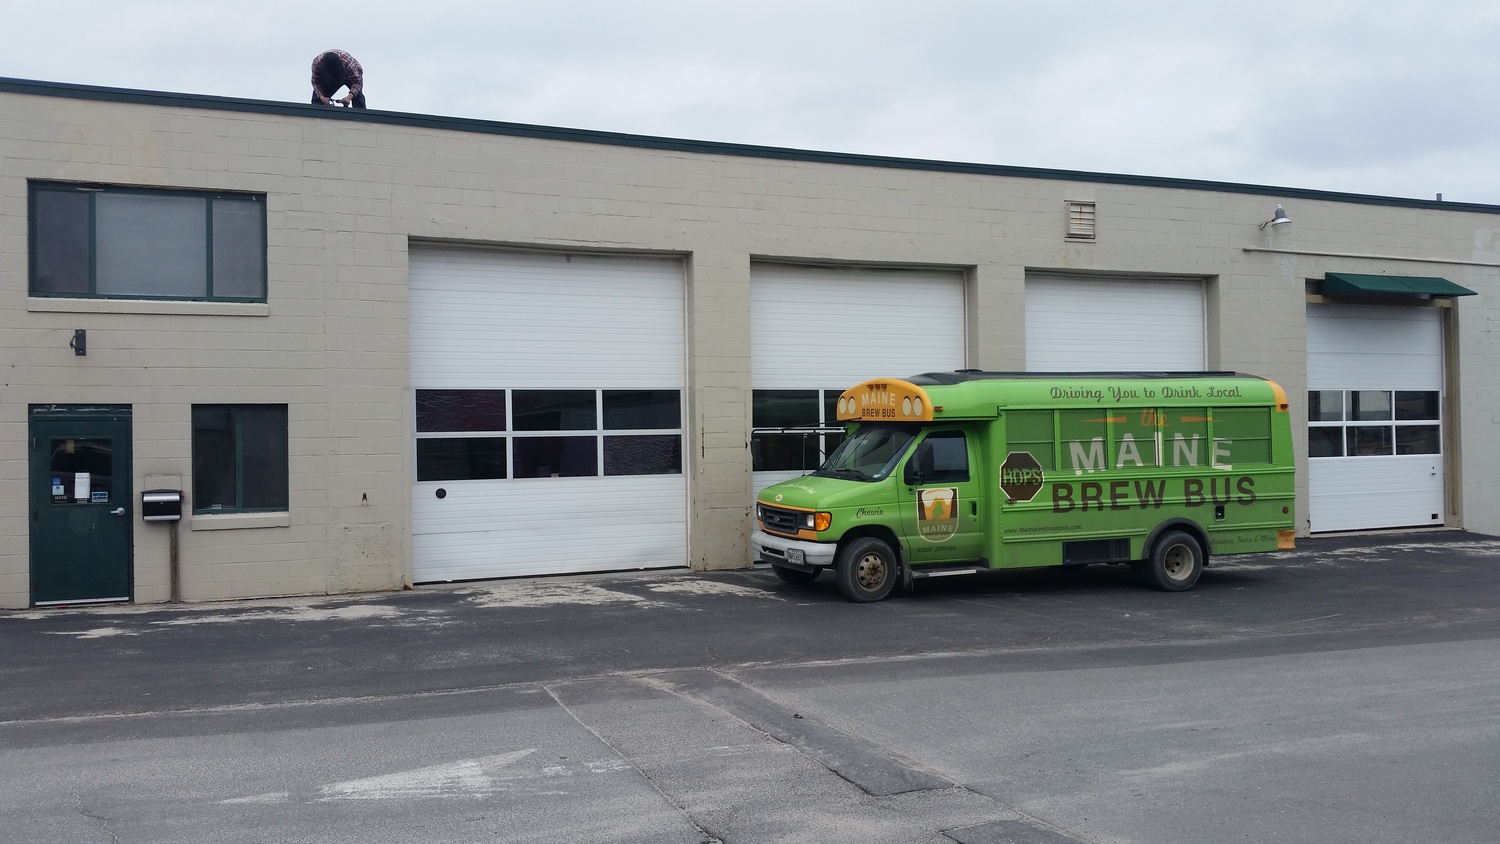  Testing to see how it will look with our buses (we didn't see the guy on the roof until after we took the pic). The building was once part of the Merrill Transport complex and was designed for tractor trailer repair. 